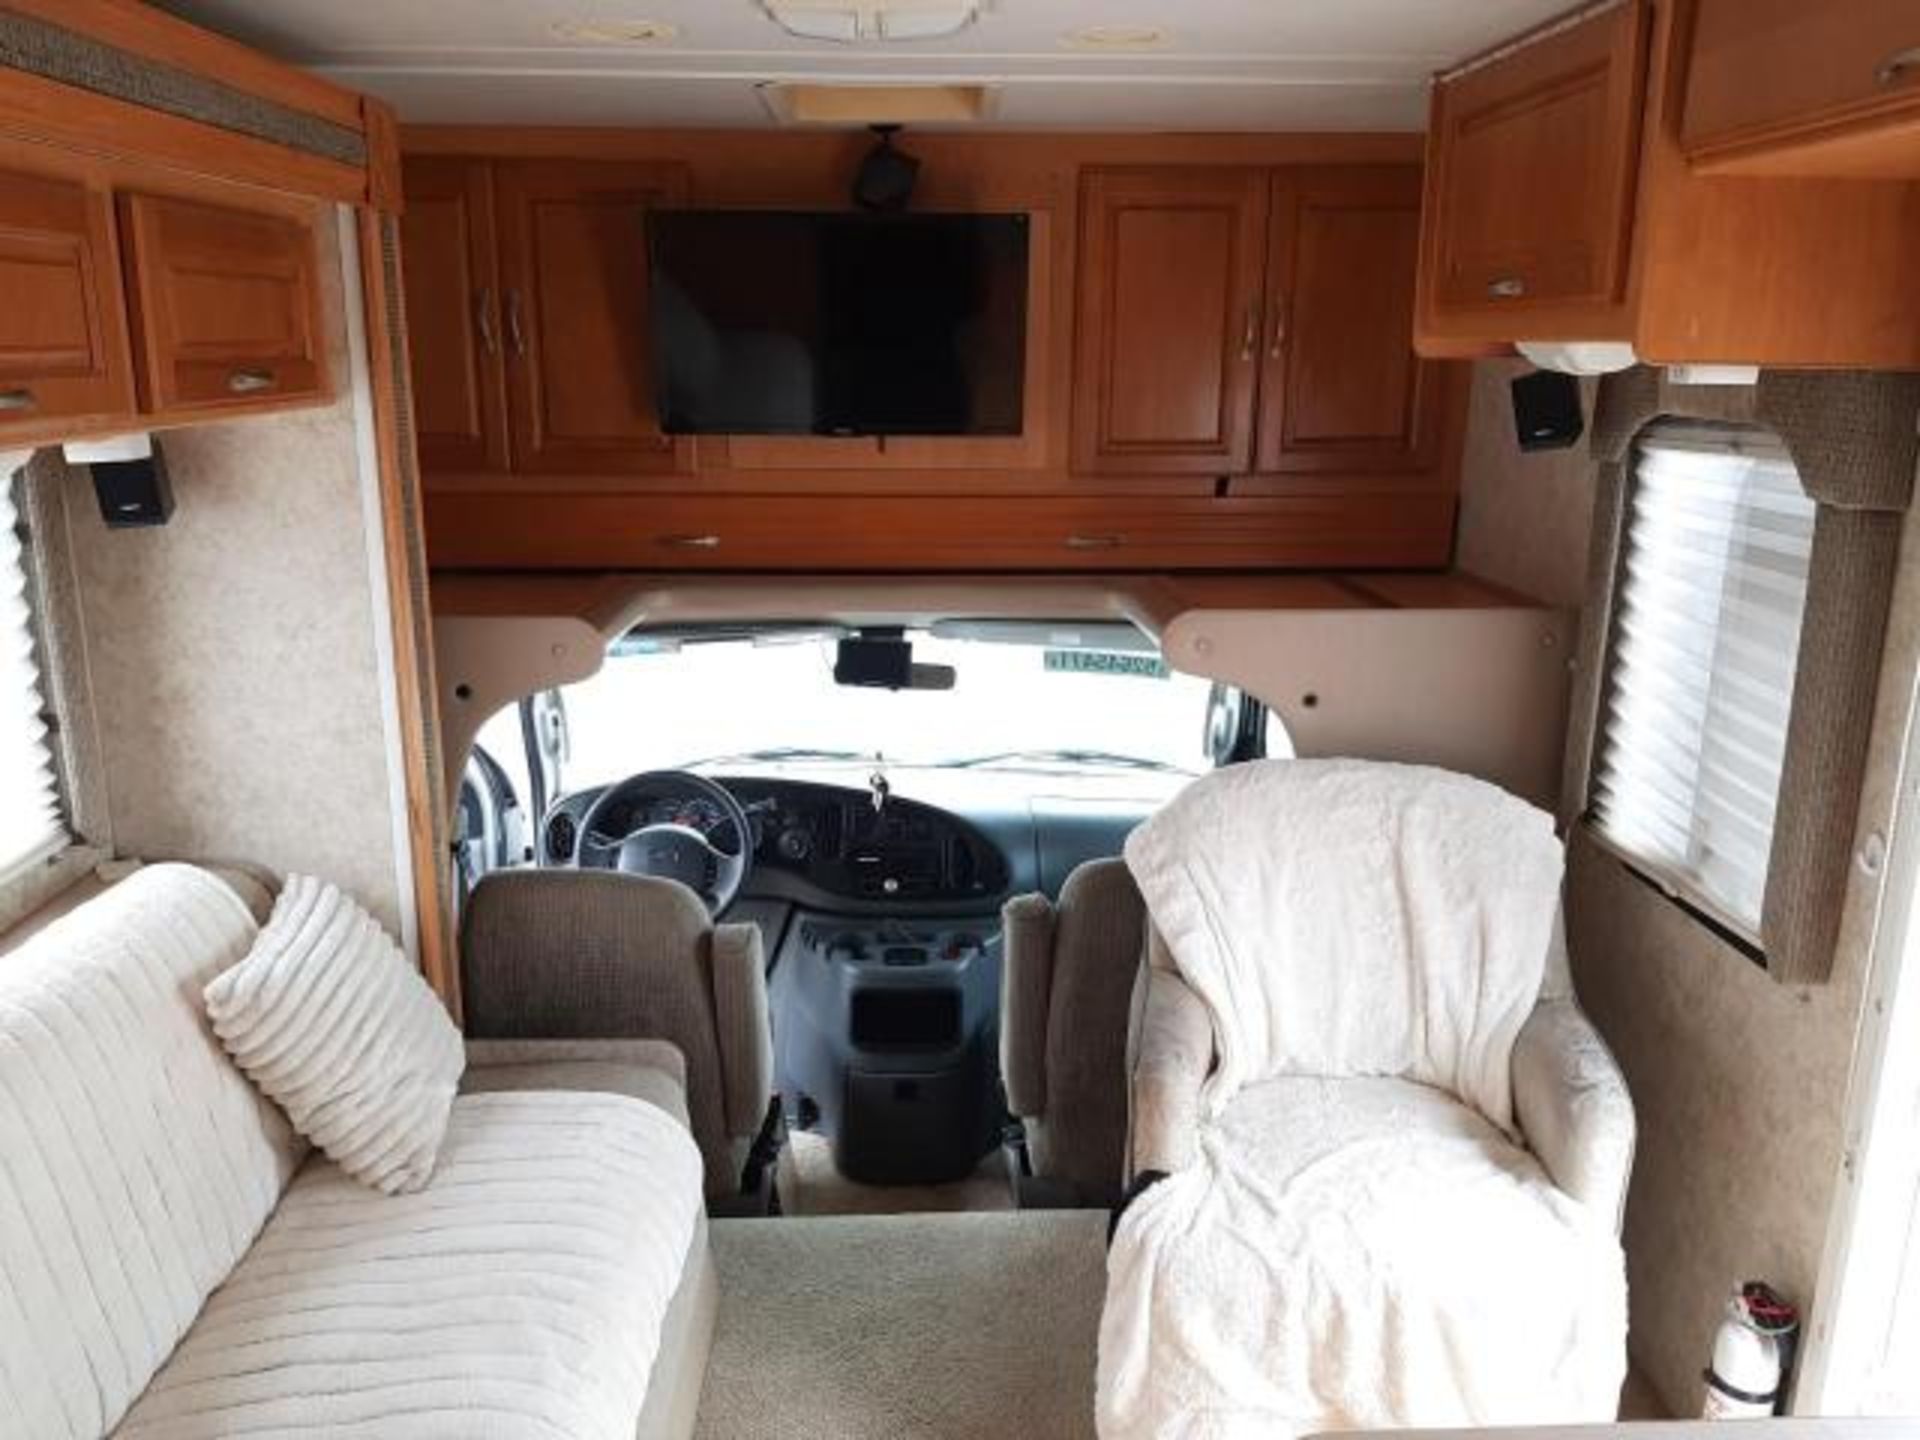 FORD E450 FOURWINDS RV 7 BERTH LHD MOTORHOME, VERY LOW MILEAGE 34,453 MILES *NO VAT* - Image 7 of 13